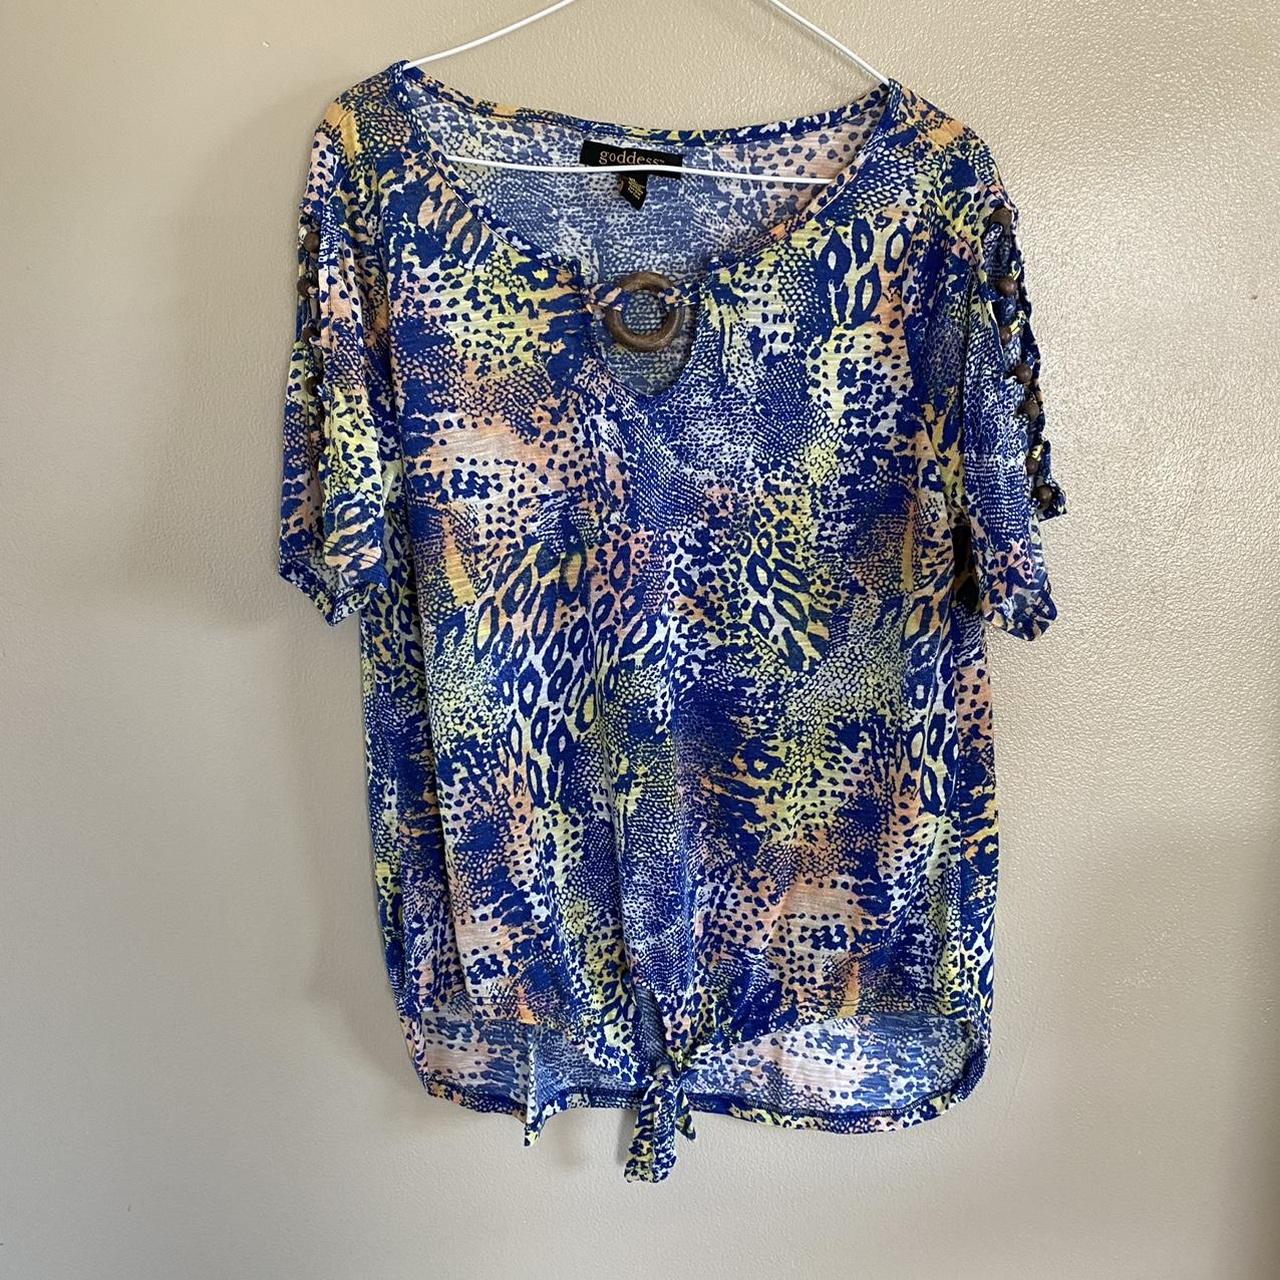 Product Image 1 - Multicolor Print Top by Goddess